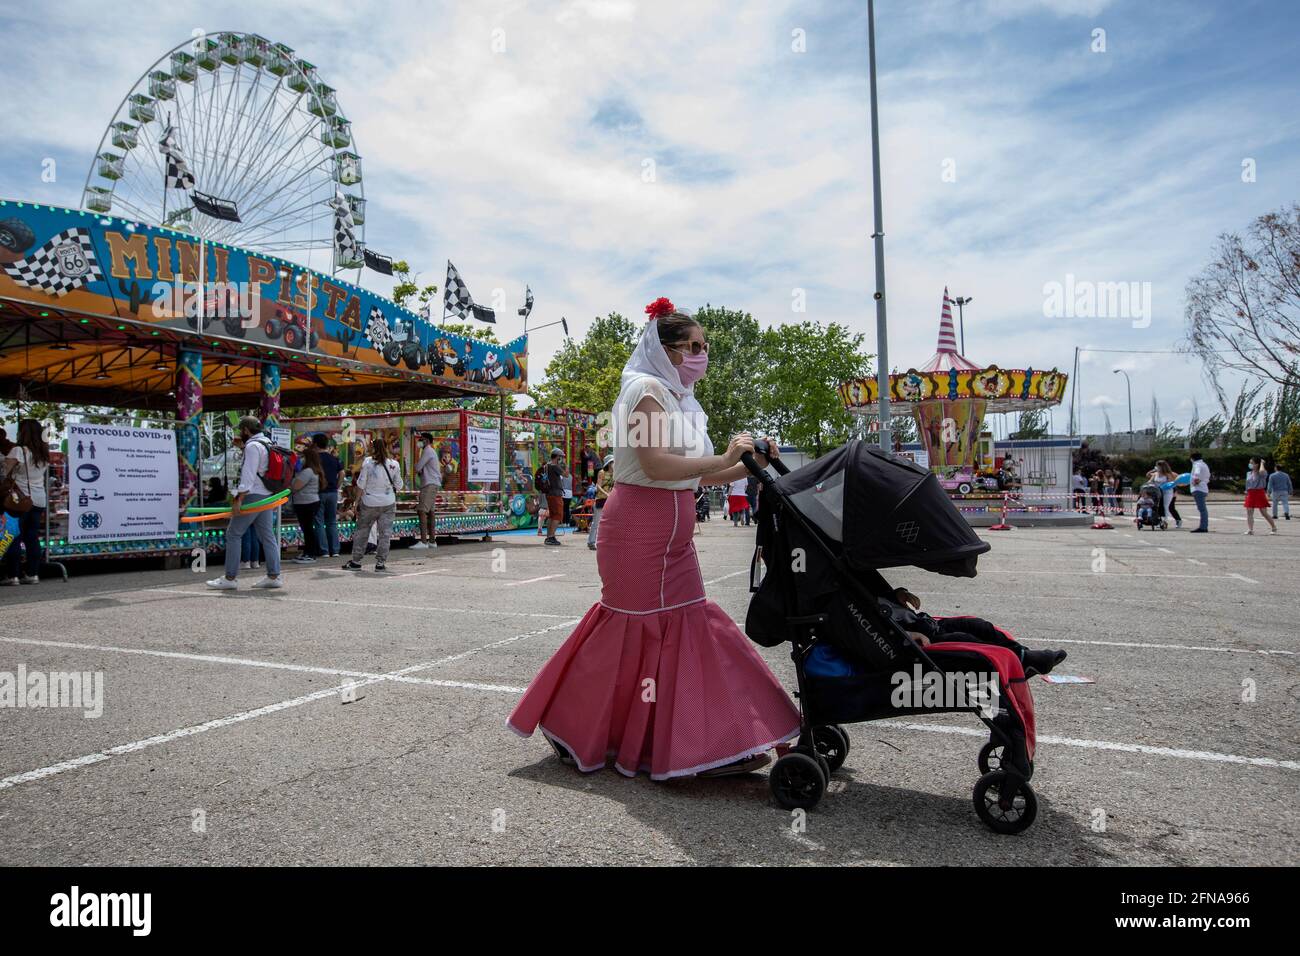 Madrid, Spain. 15th May, 2021. A woman pushing a baby stroller dressed as a chulapa seen during the San Isidro festivity in the IFEMA fairground.One of the most celebrated holidays of Madrid is the Feast Day of San Isidro which this year took place in the IFEMA fairground. (Photo by Guillermo Guterrez Carrascal/SOPA Images/Sipa USA) Credit: Sipa USA/Alamy Live News Stock Photo